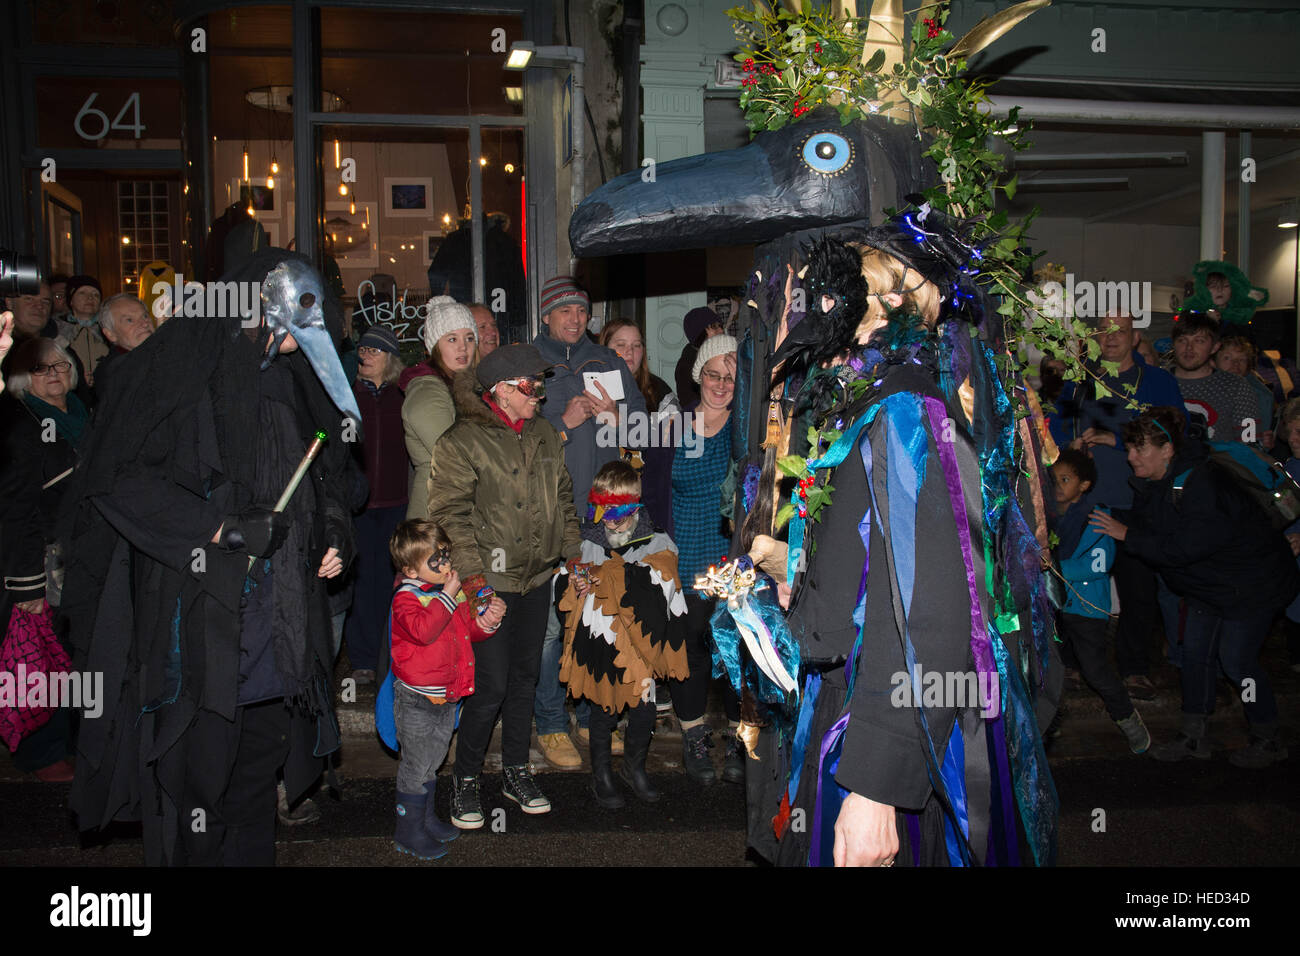 Penzance, Cornwall, UK. 21st December 2016. The annual Montol festival held on the date of the feast of St Thomas the Apostle and the winter solstice. Guise processions and lantern parades take place leading to the chalking of the Mock. Credit: Simon Maycock/Alamy Live News Stock Photo